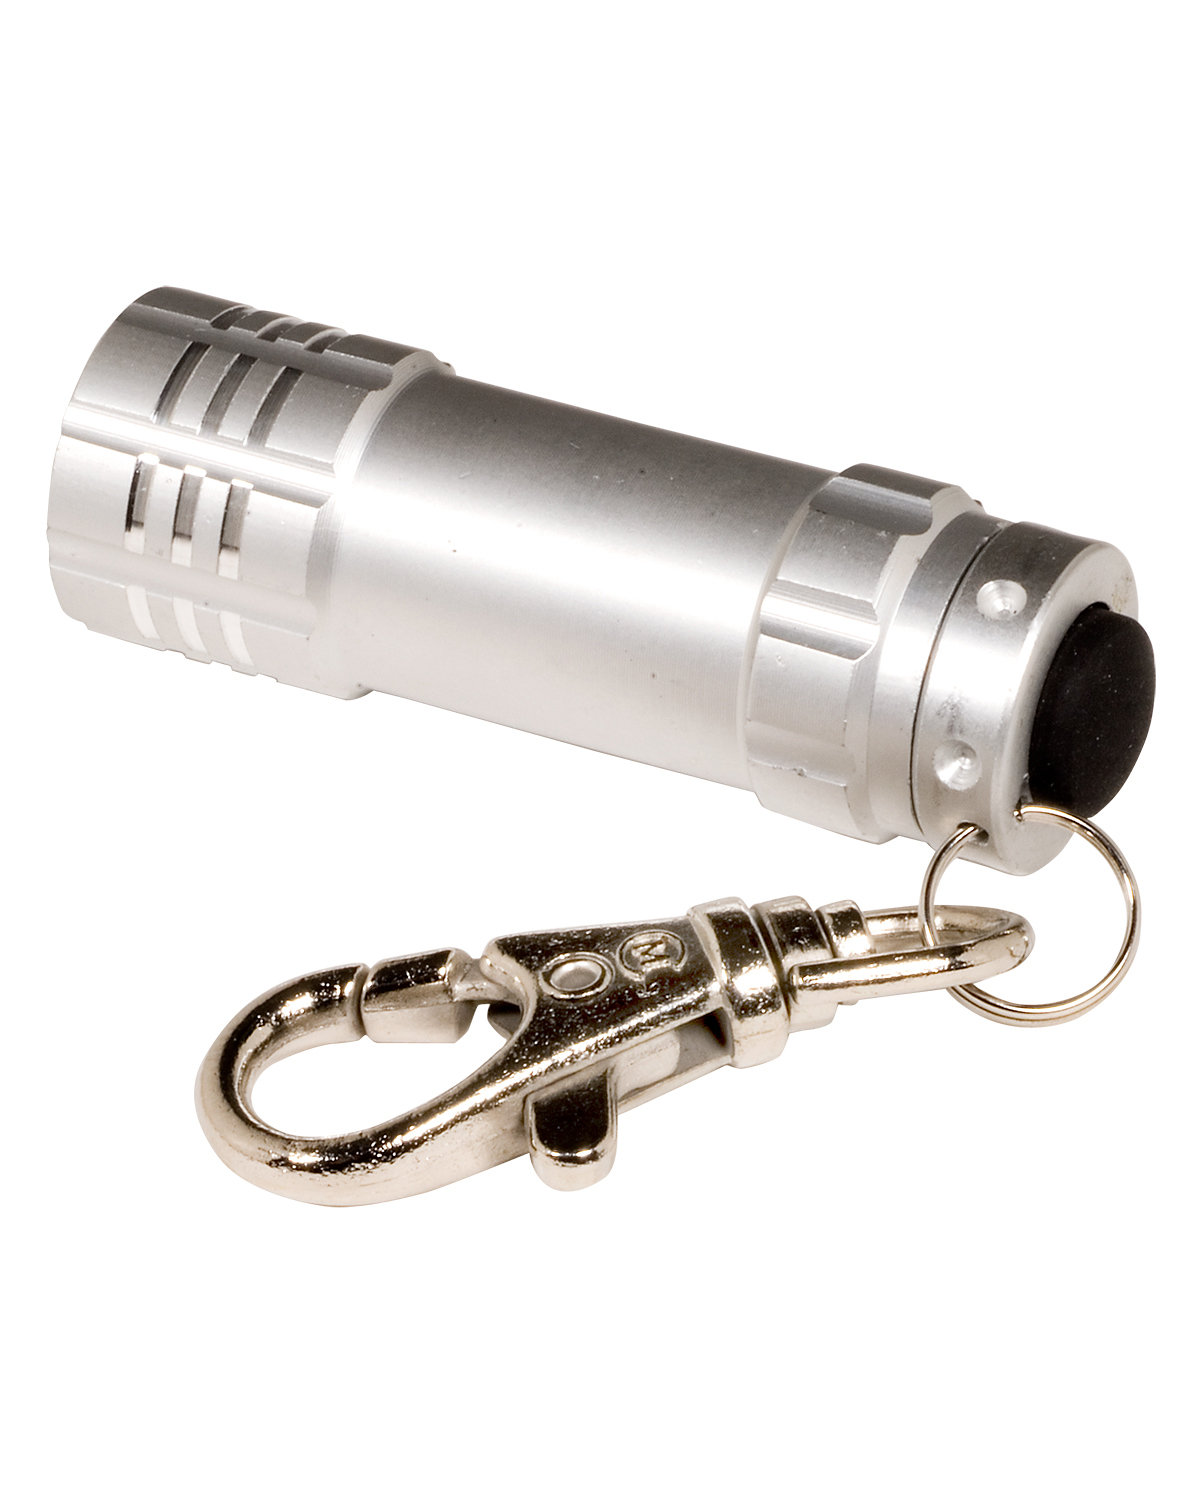 Prime Line Micro 3 Led Torch-Key Holder silver 